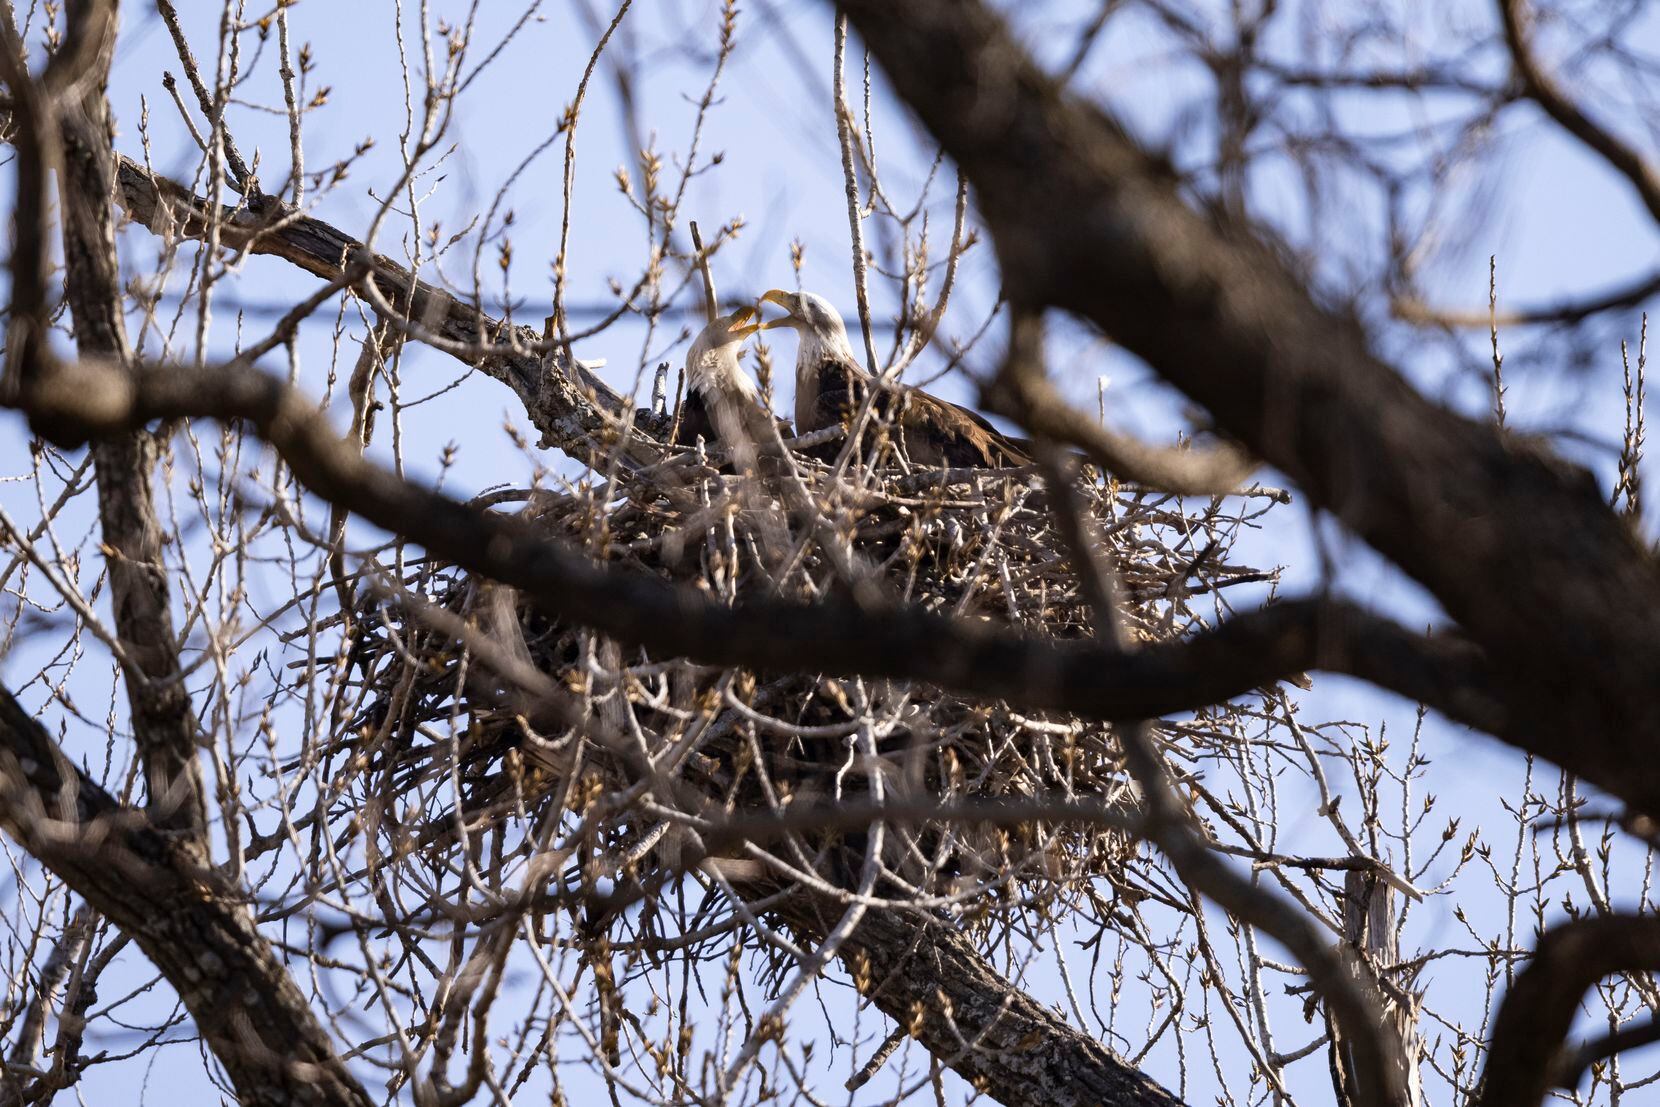 A pair of bald eagles sit in their nest at White Rock Lake Wednesday, Feb. 9, 2022, in Dallas, Texas.  The pair set up a nest southeast of the intersection of East Lake Highlands Drive and North Buckner Boulevard.